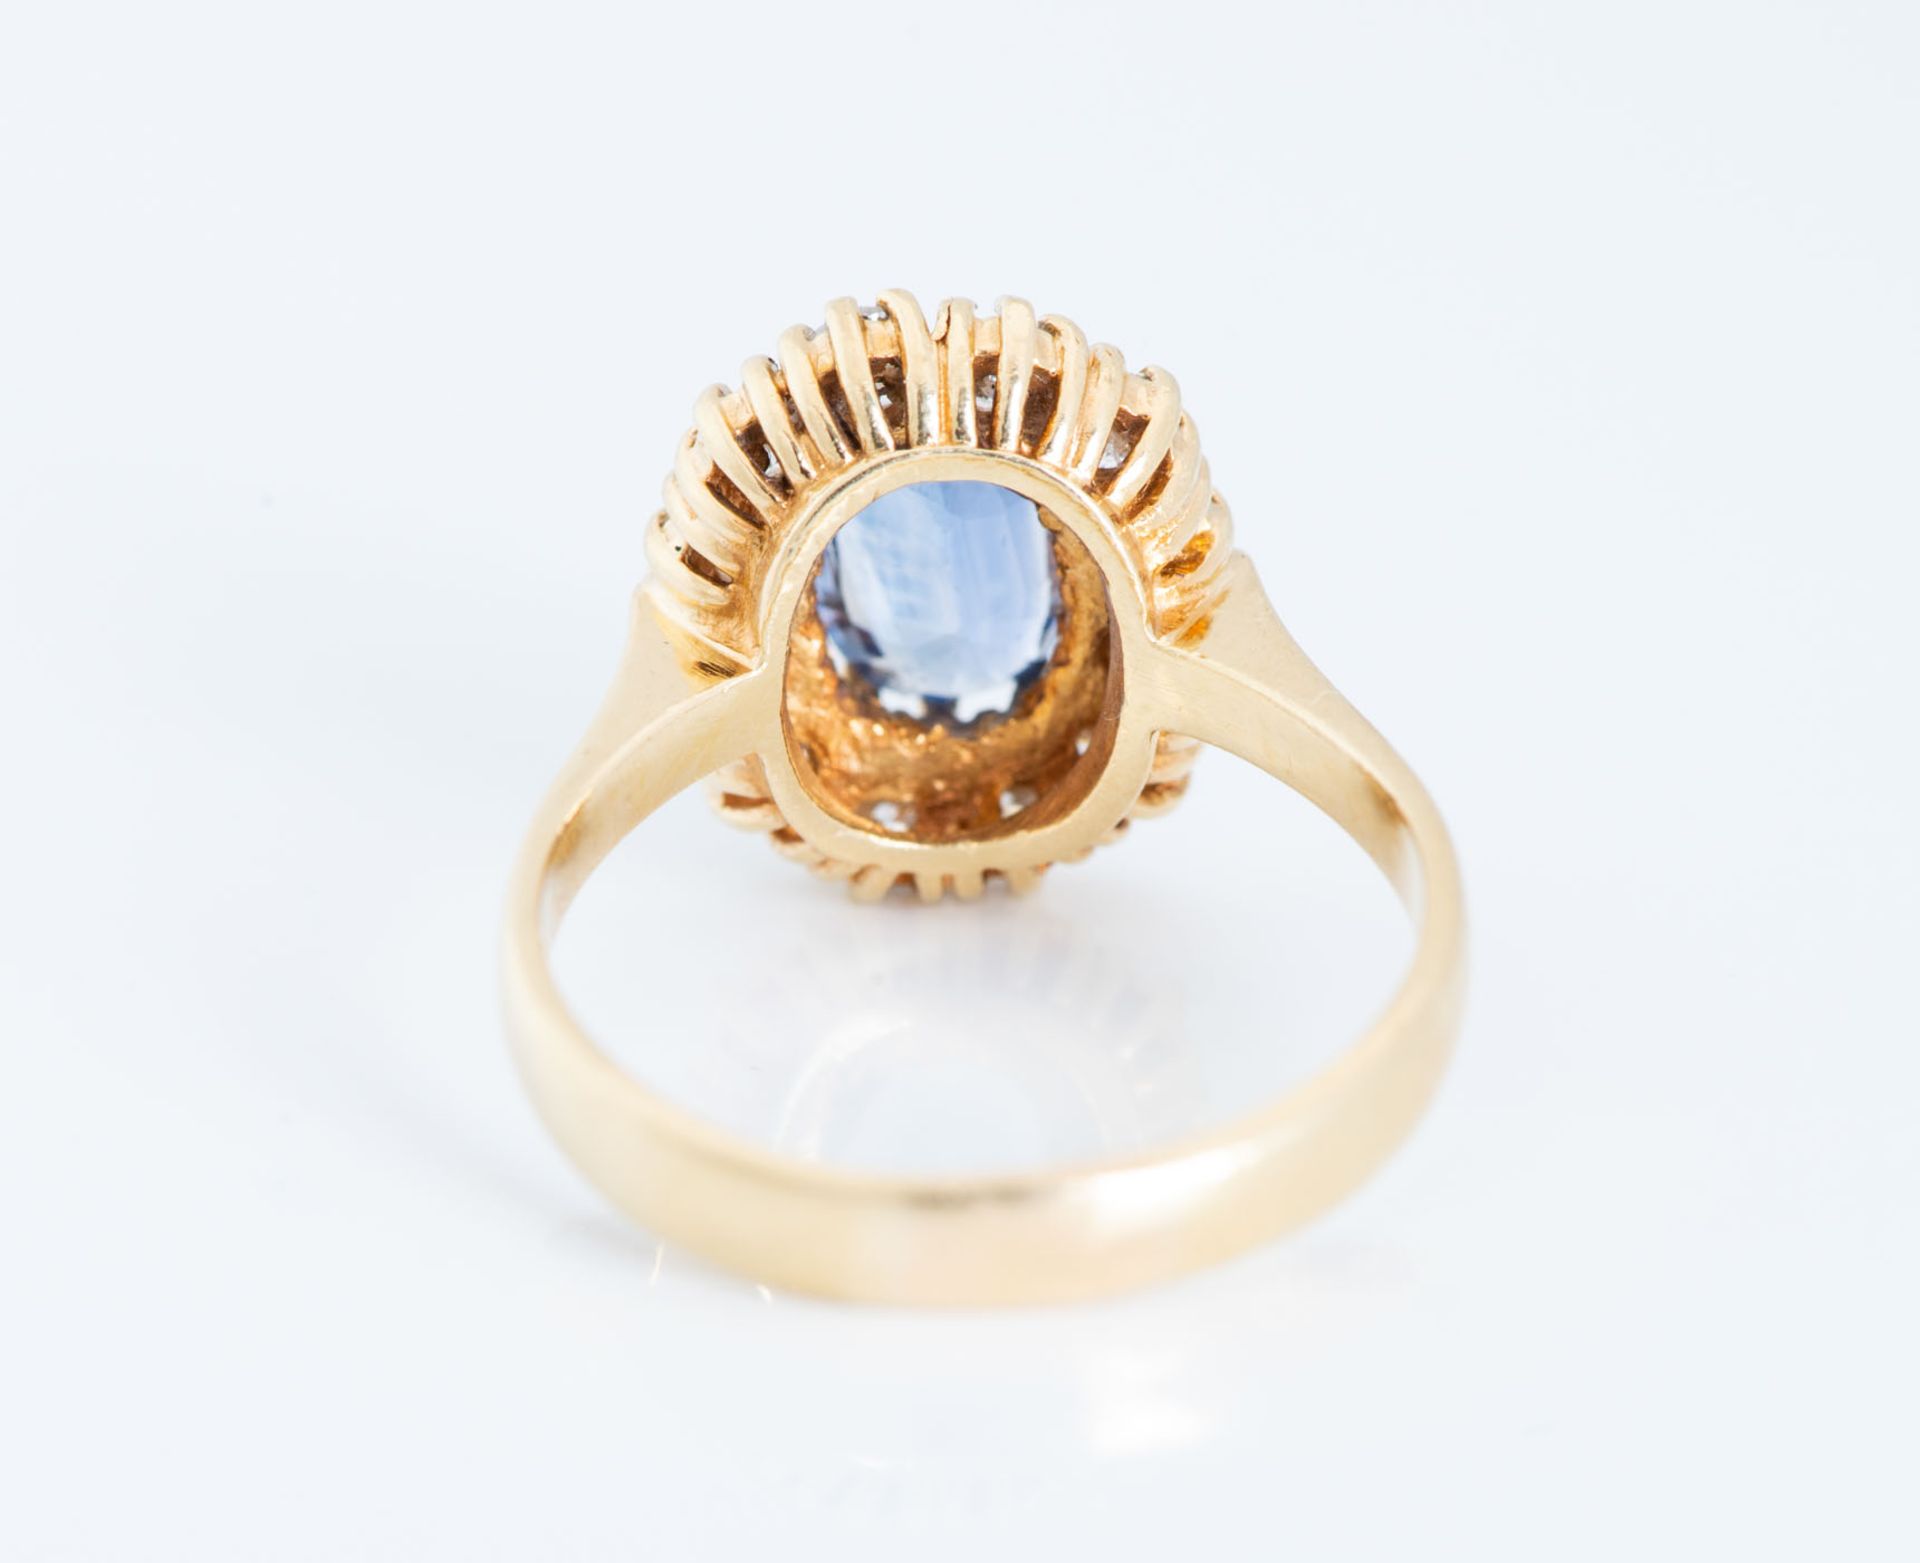 An 18K Gold Diamond and Sapphire Ring - Image 4 of 5